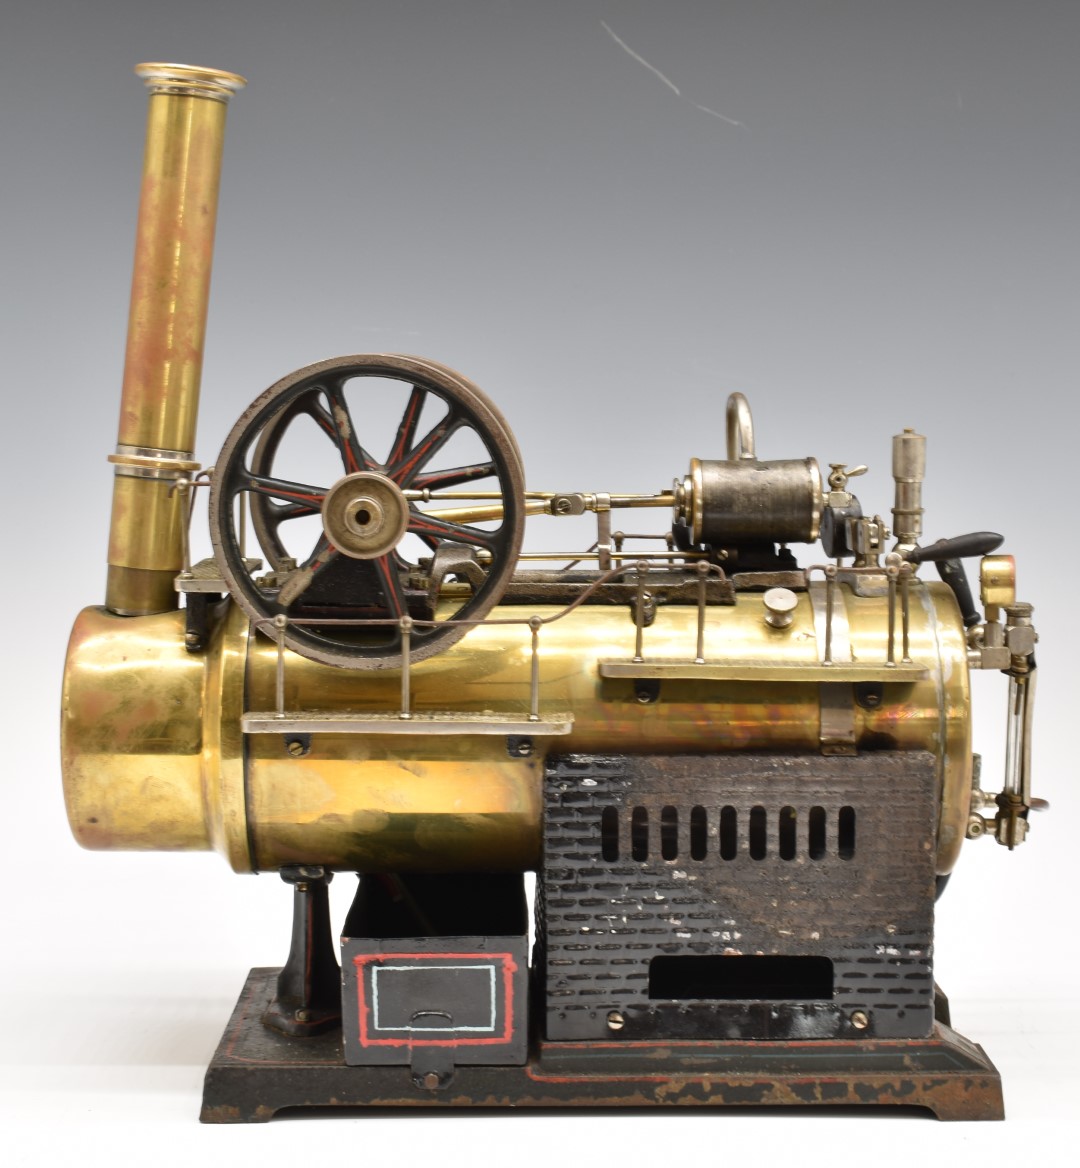 Doll model 520 overtype live steam engine with single cylinder, with twin fly wheels, lever safety - Image 2 of 7